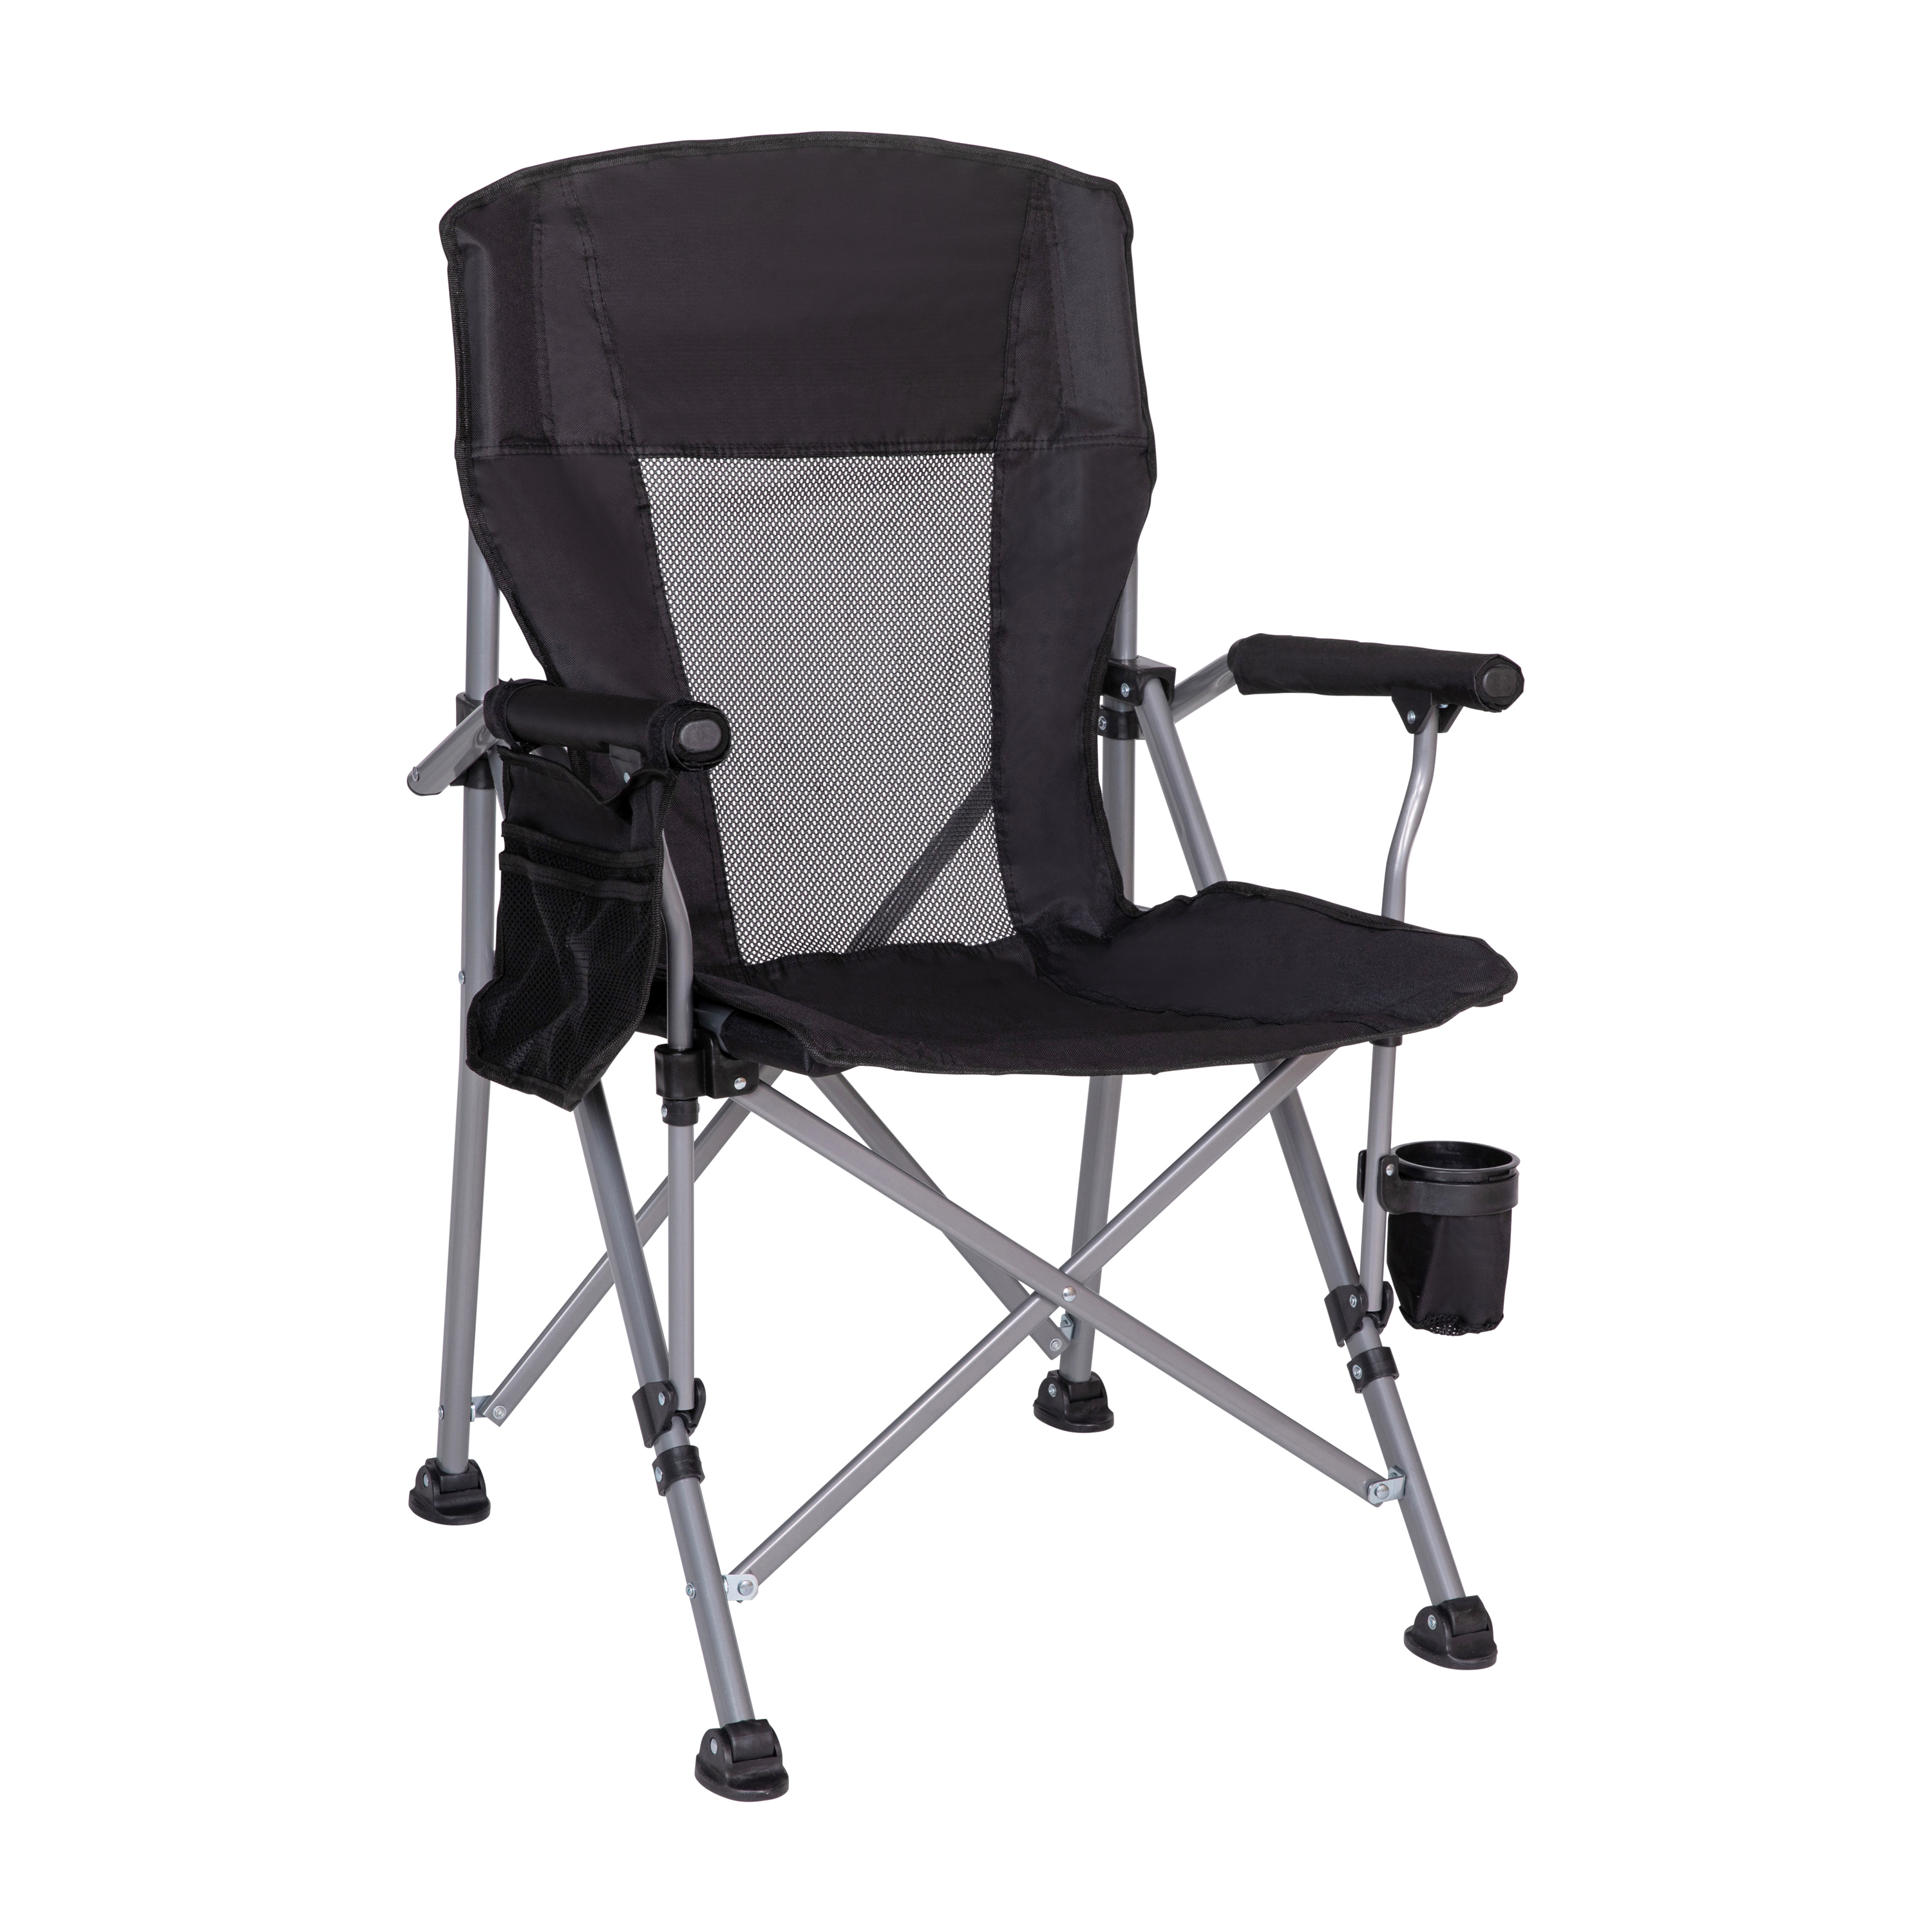 JJC302 High Back Folding Heavy Duty Portable Camping Chair with Padded Arms Featured Image